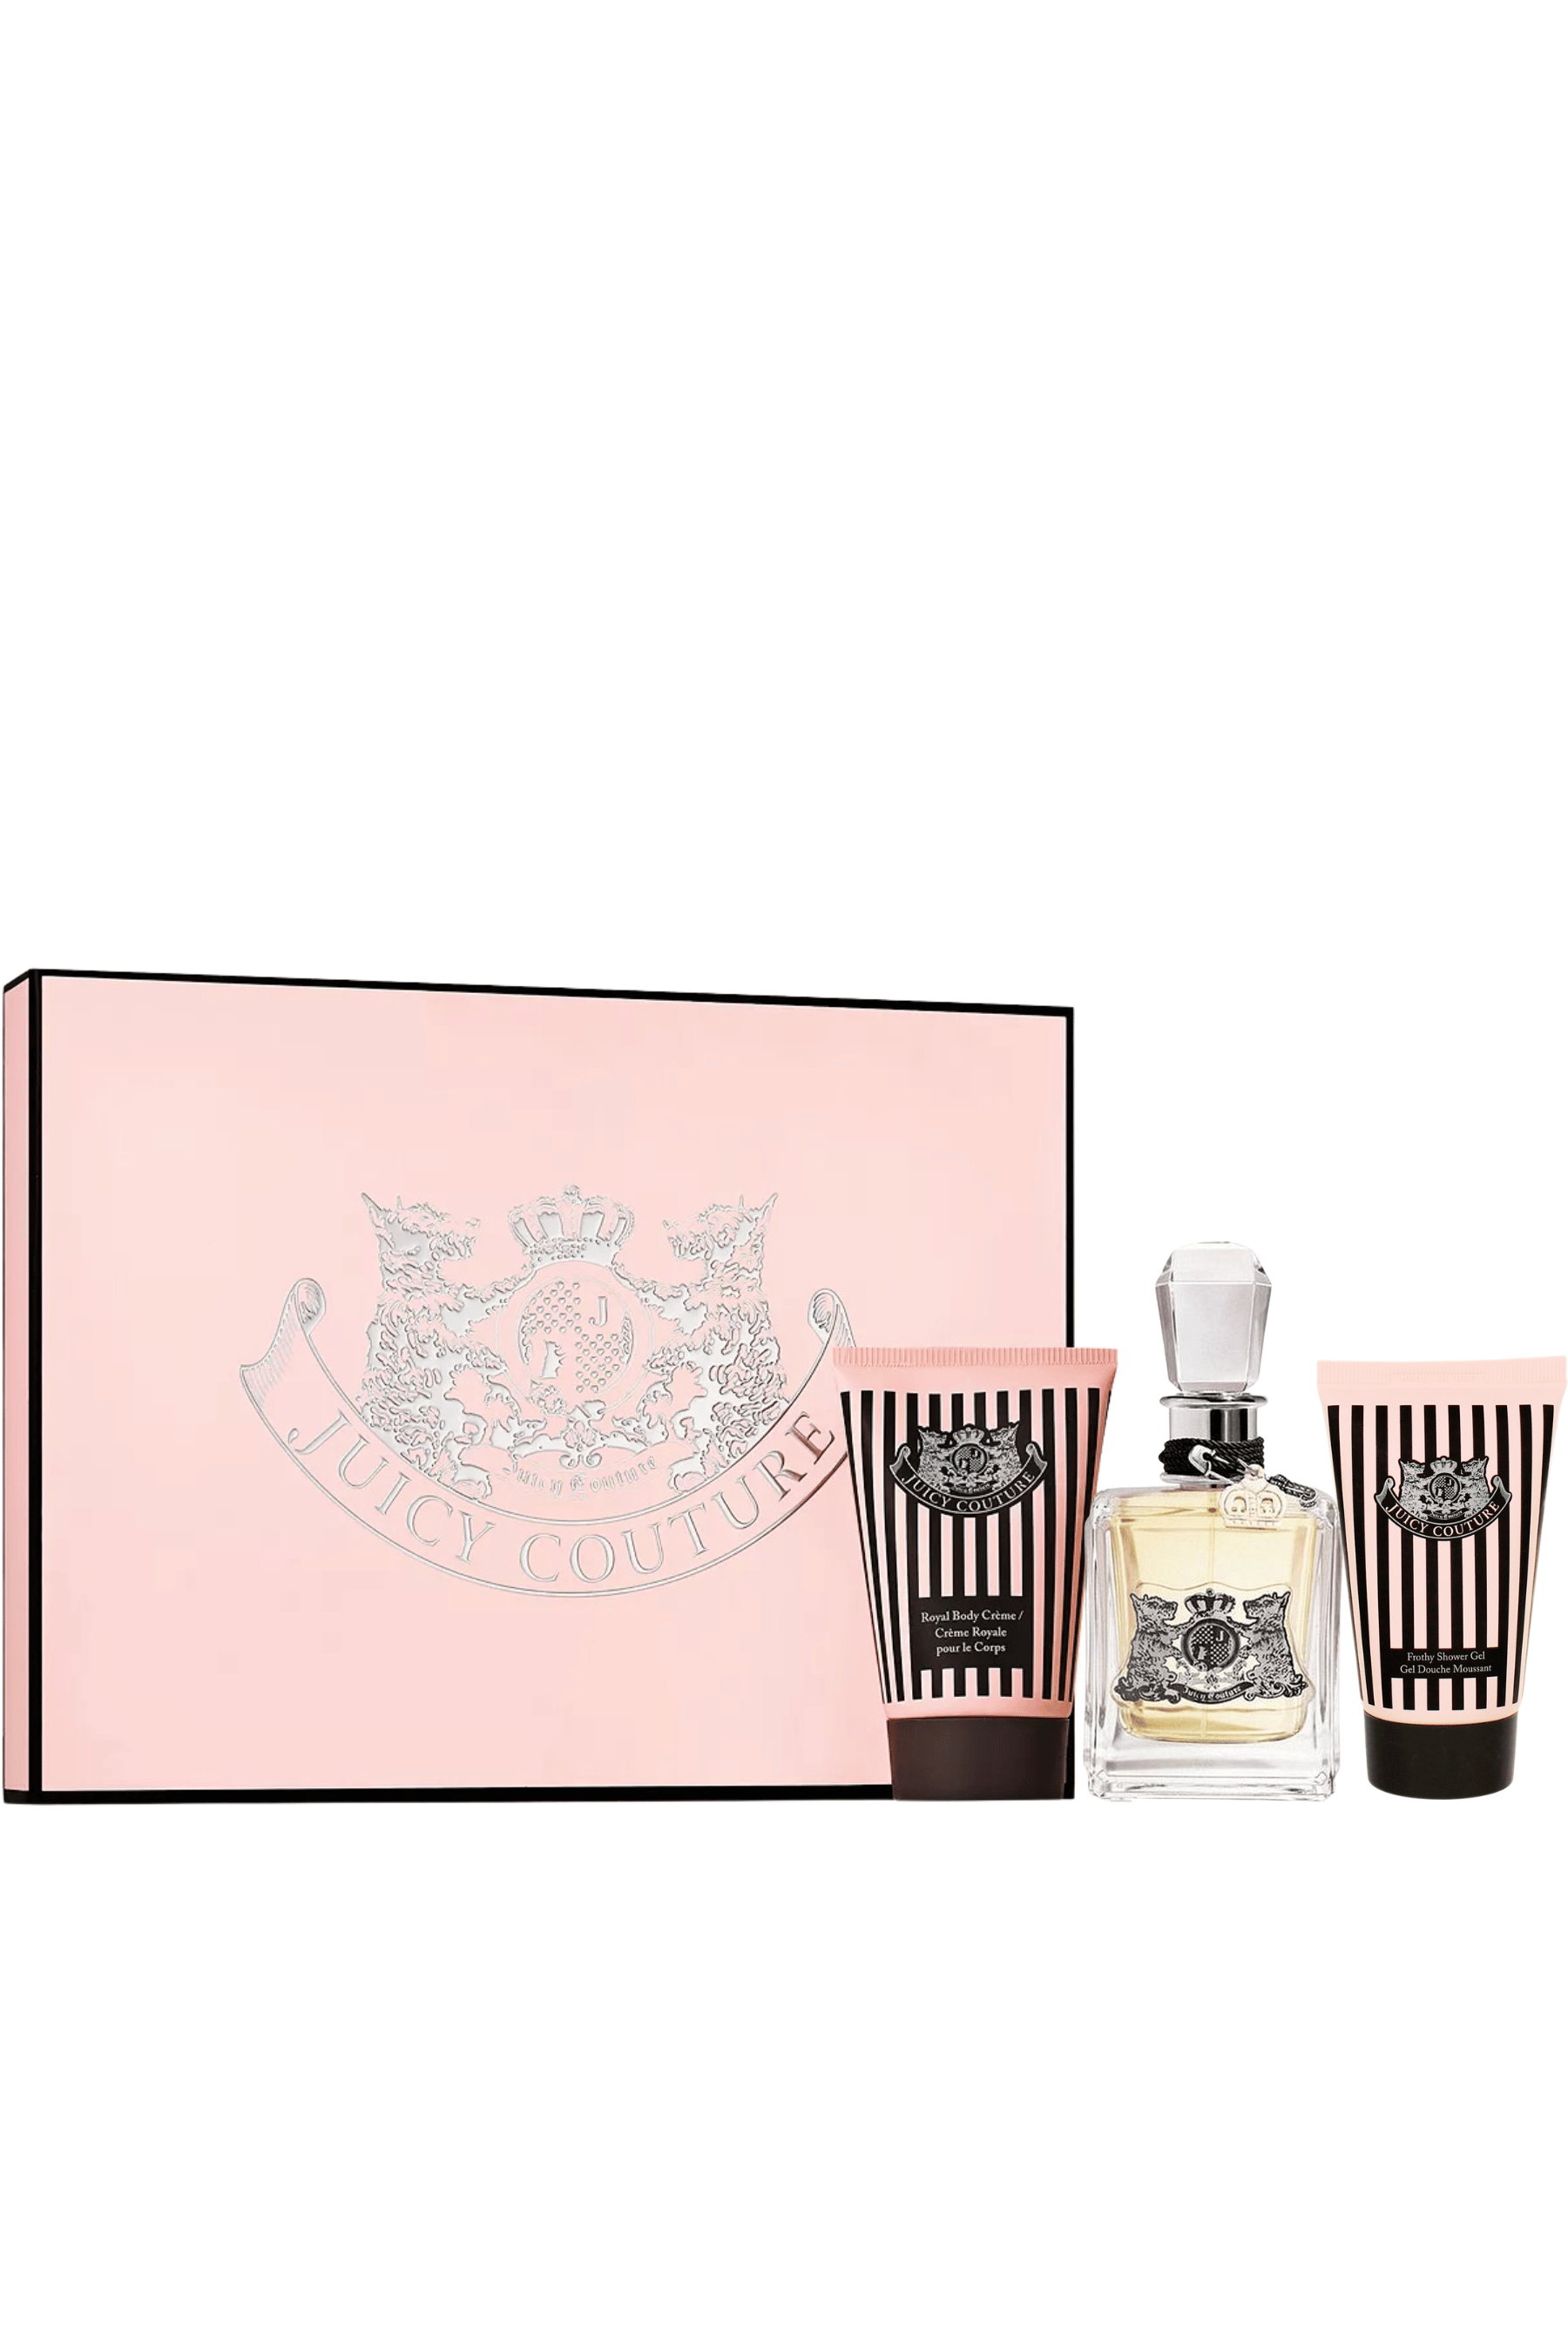 Juicy Couture 4 Piece Fragrance Gift Set for Women - Value